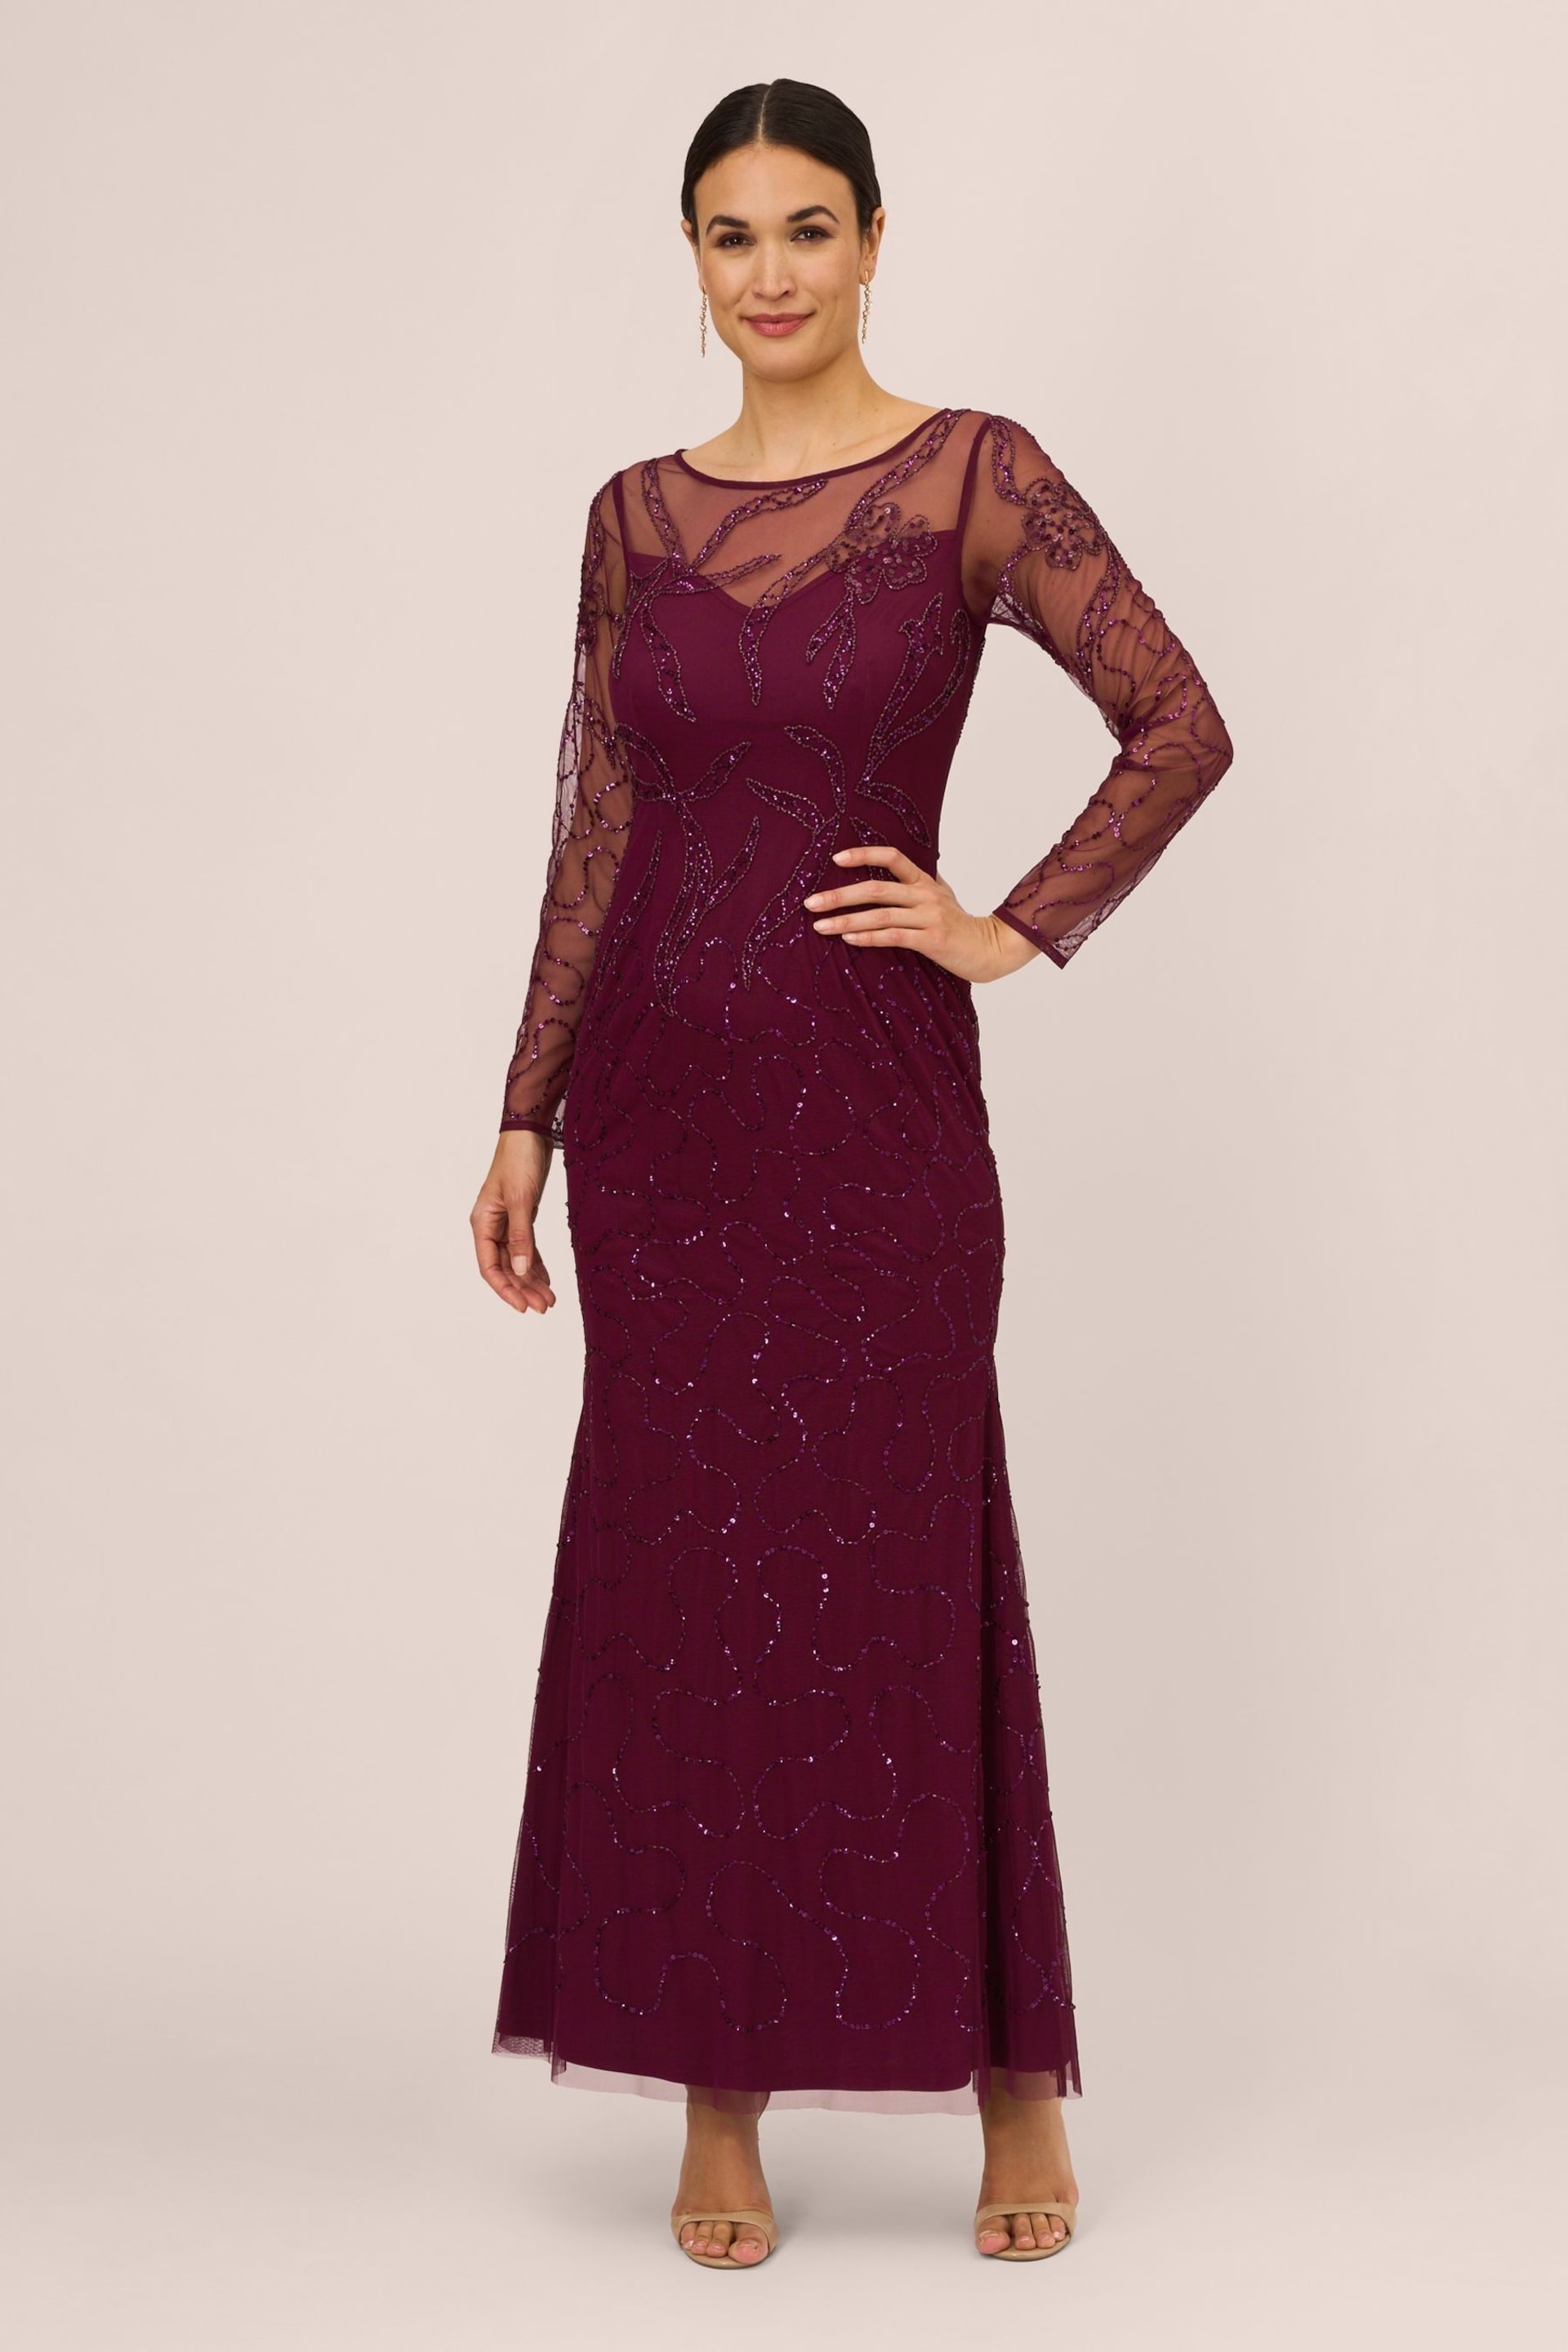 Adrianna Papell Red Studio Beaded Long Sleeve Gown - Image 1 of 6